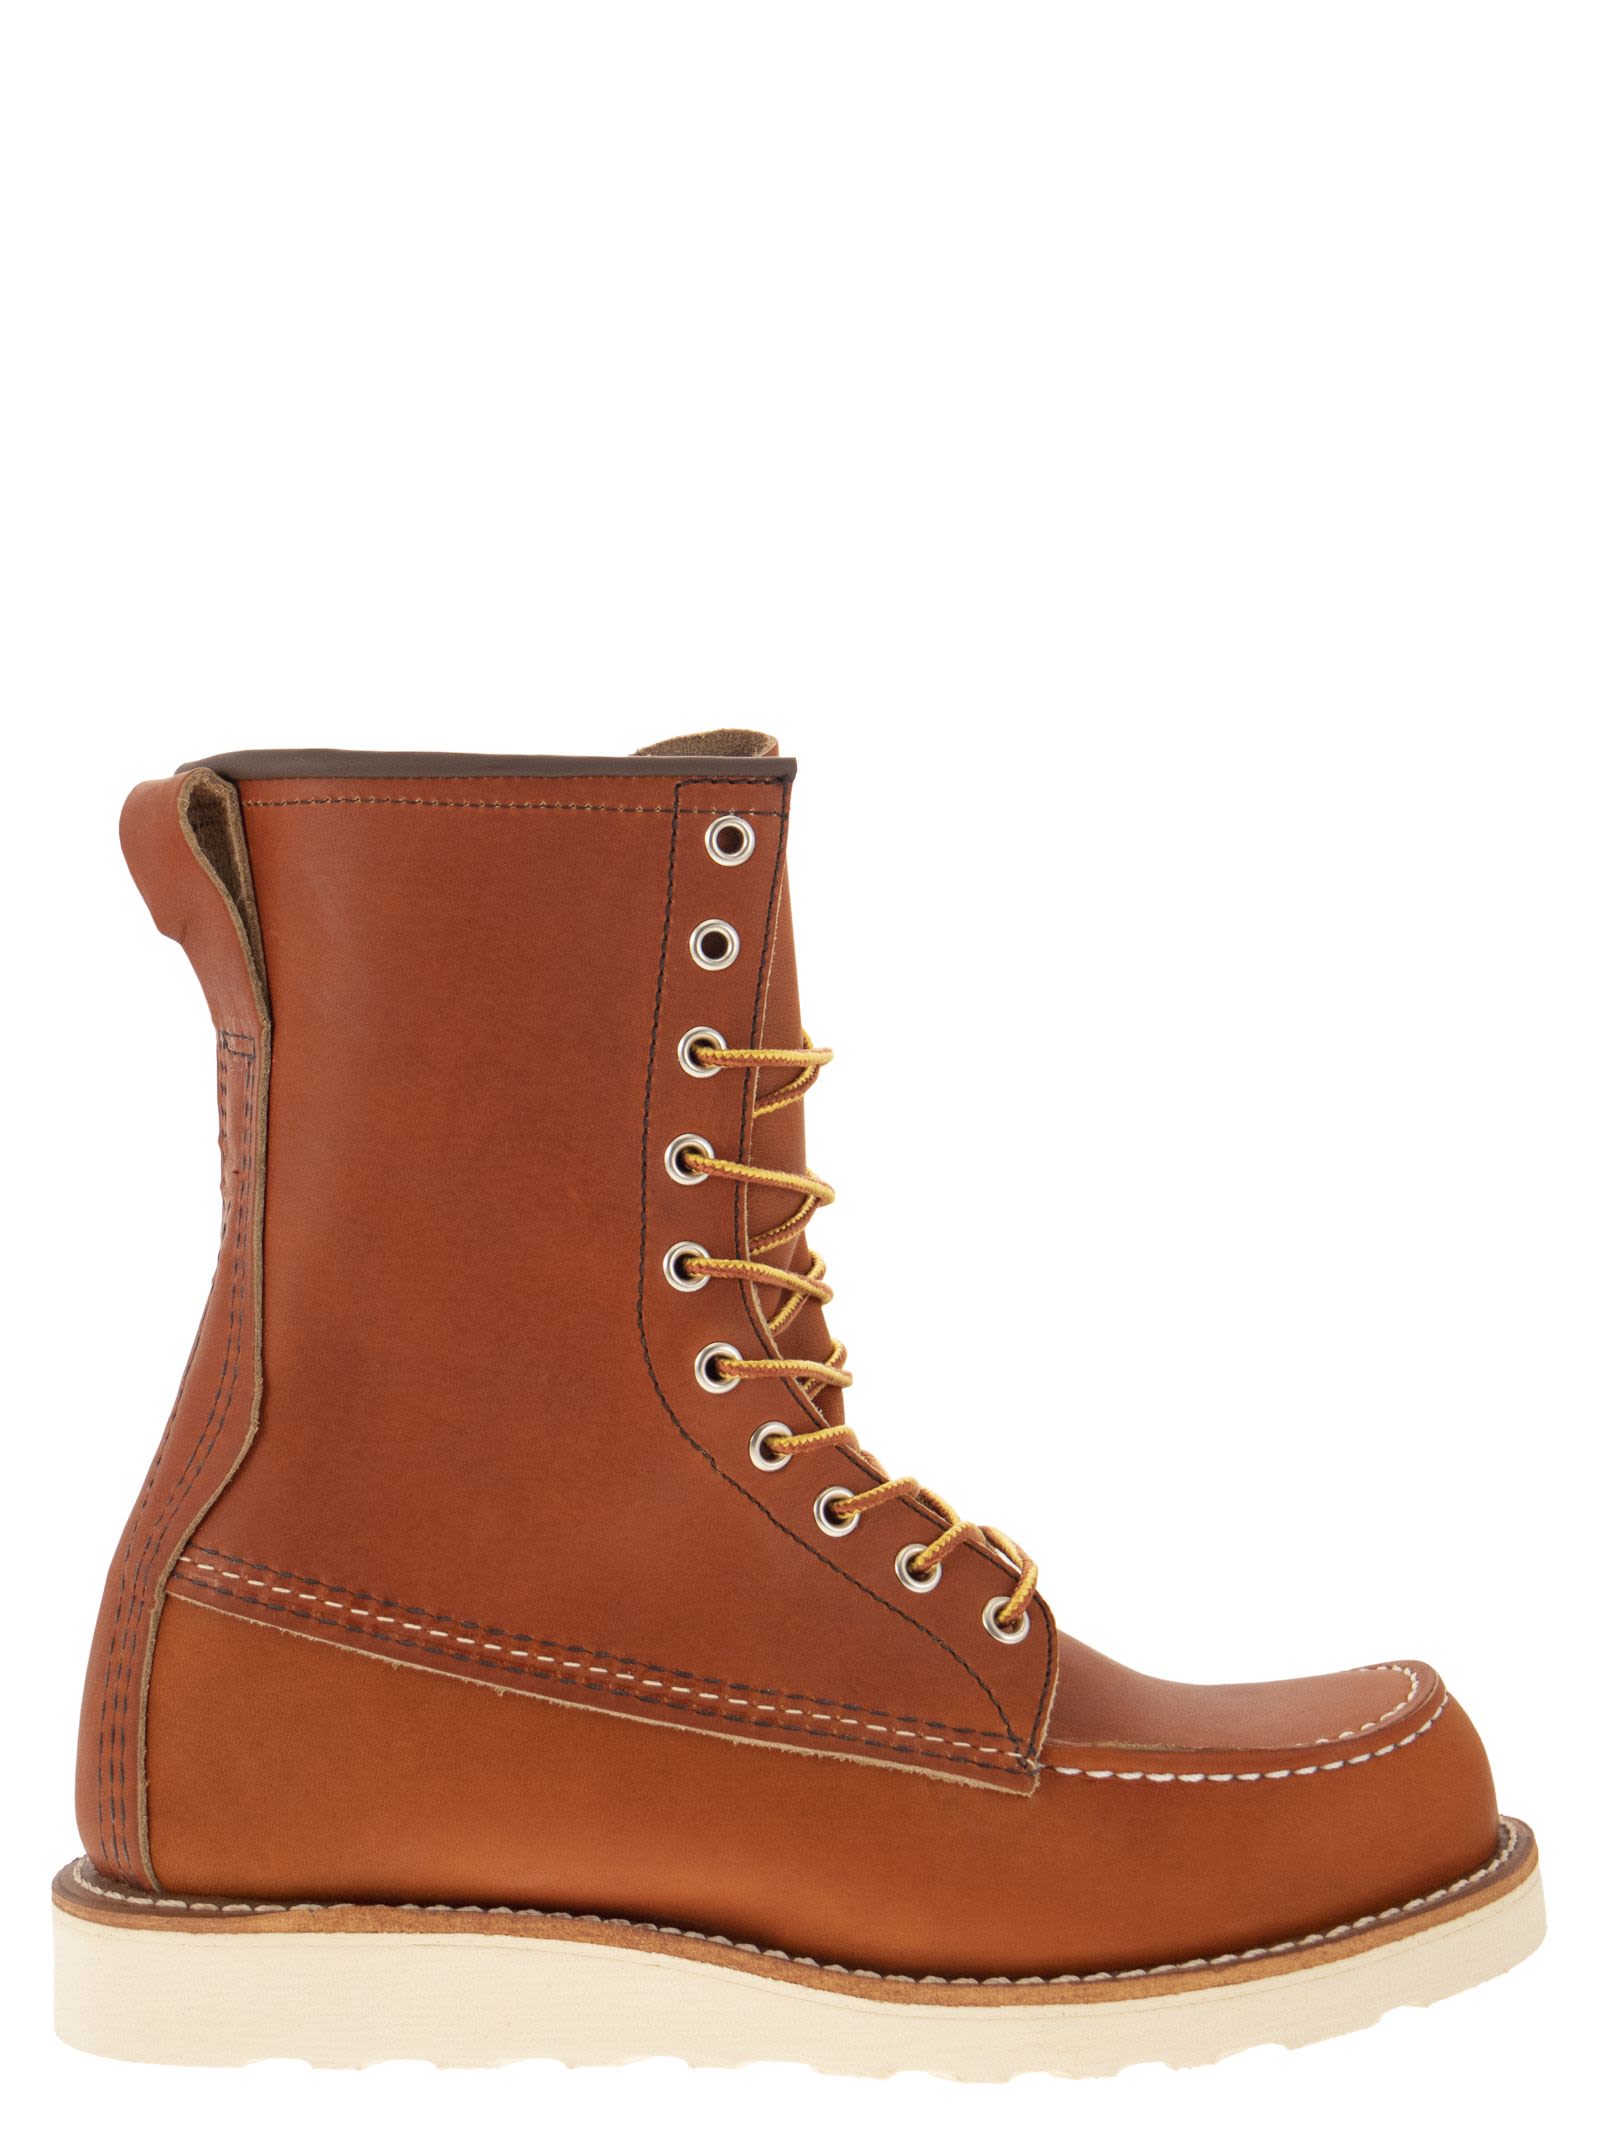 Classic Moc - High Leather Lace-up Boot